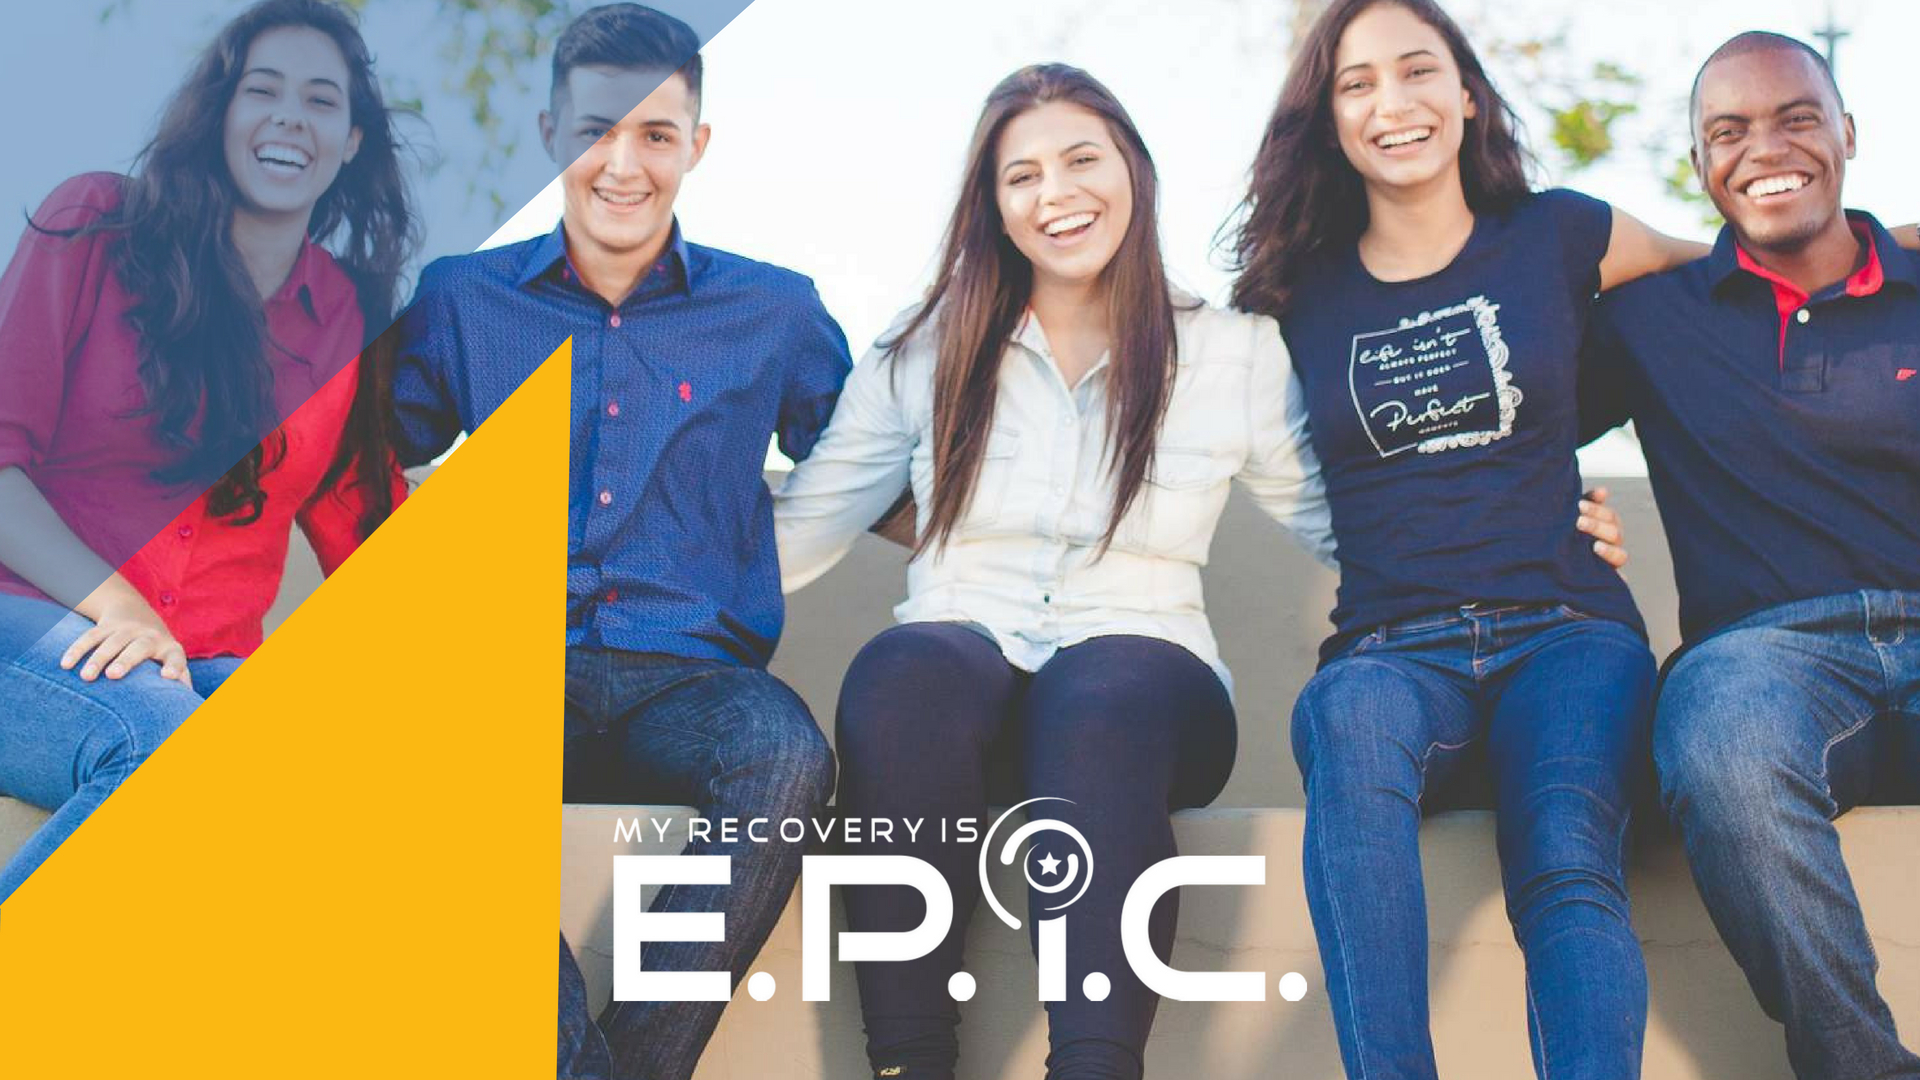 YPR: My Recovery is E.P.I.C. (Day One)